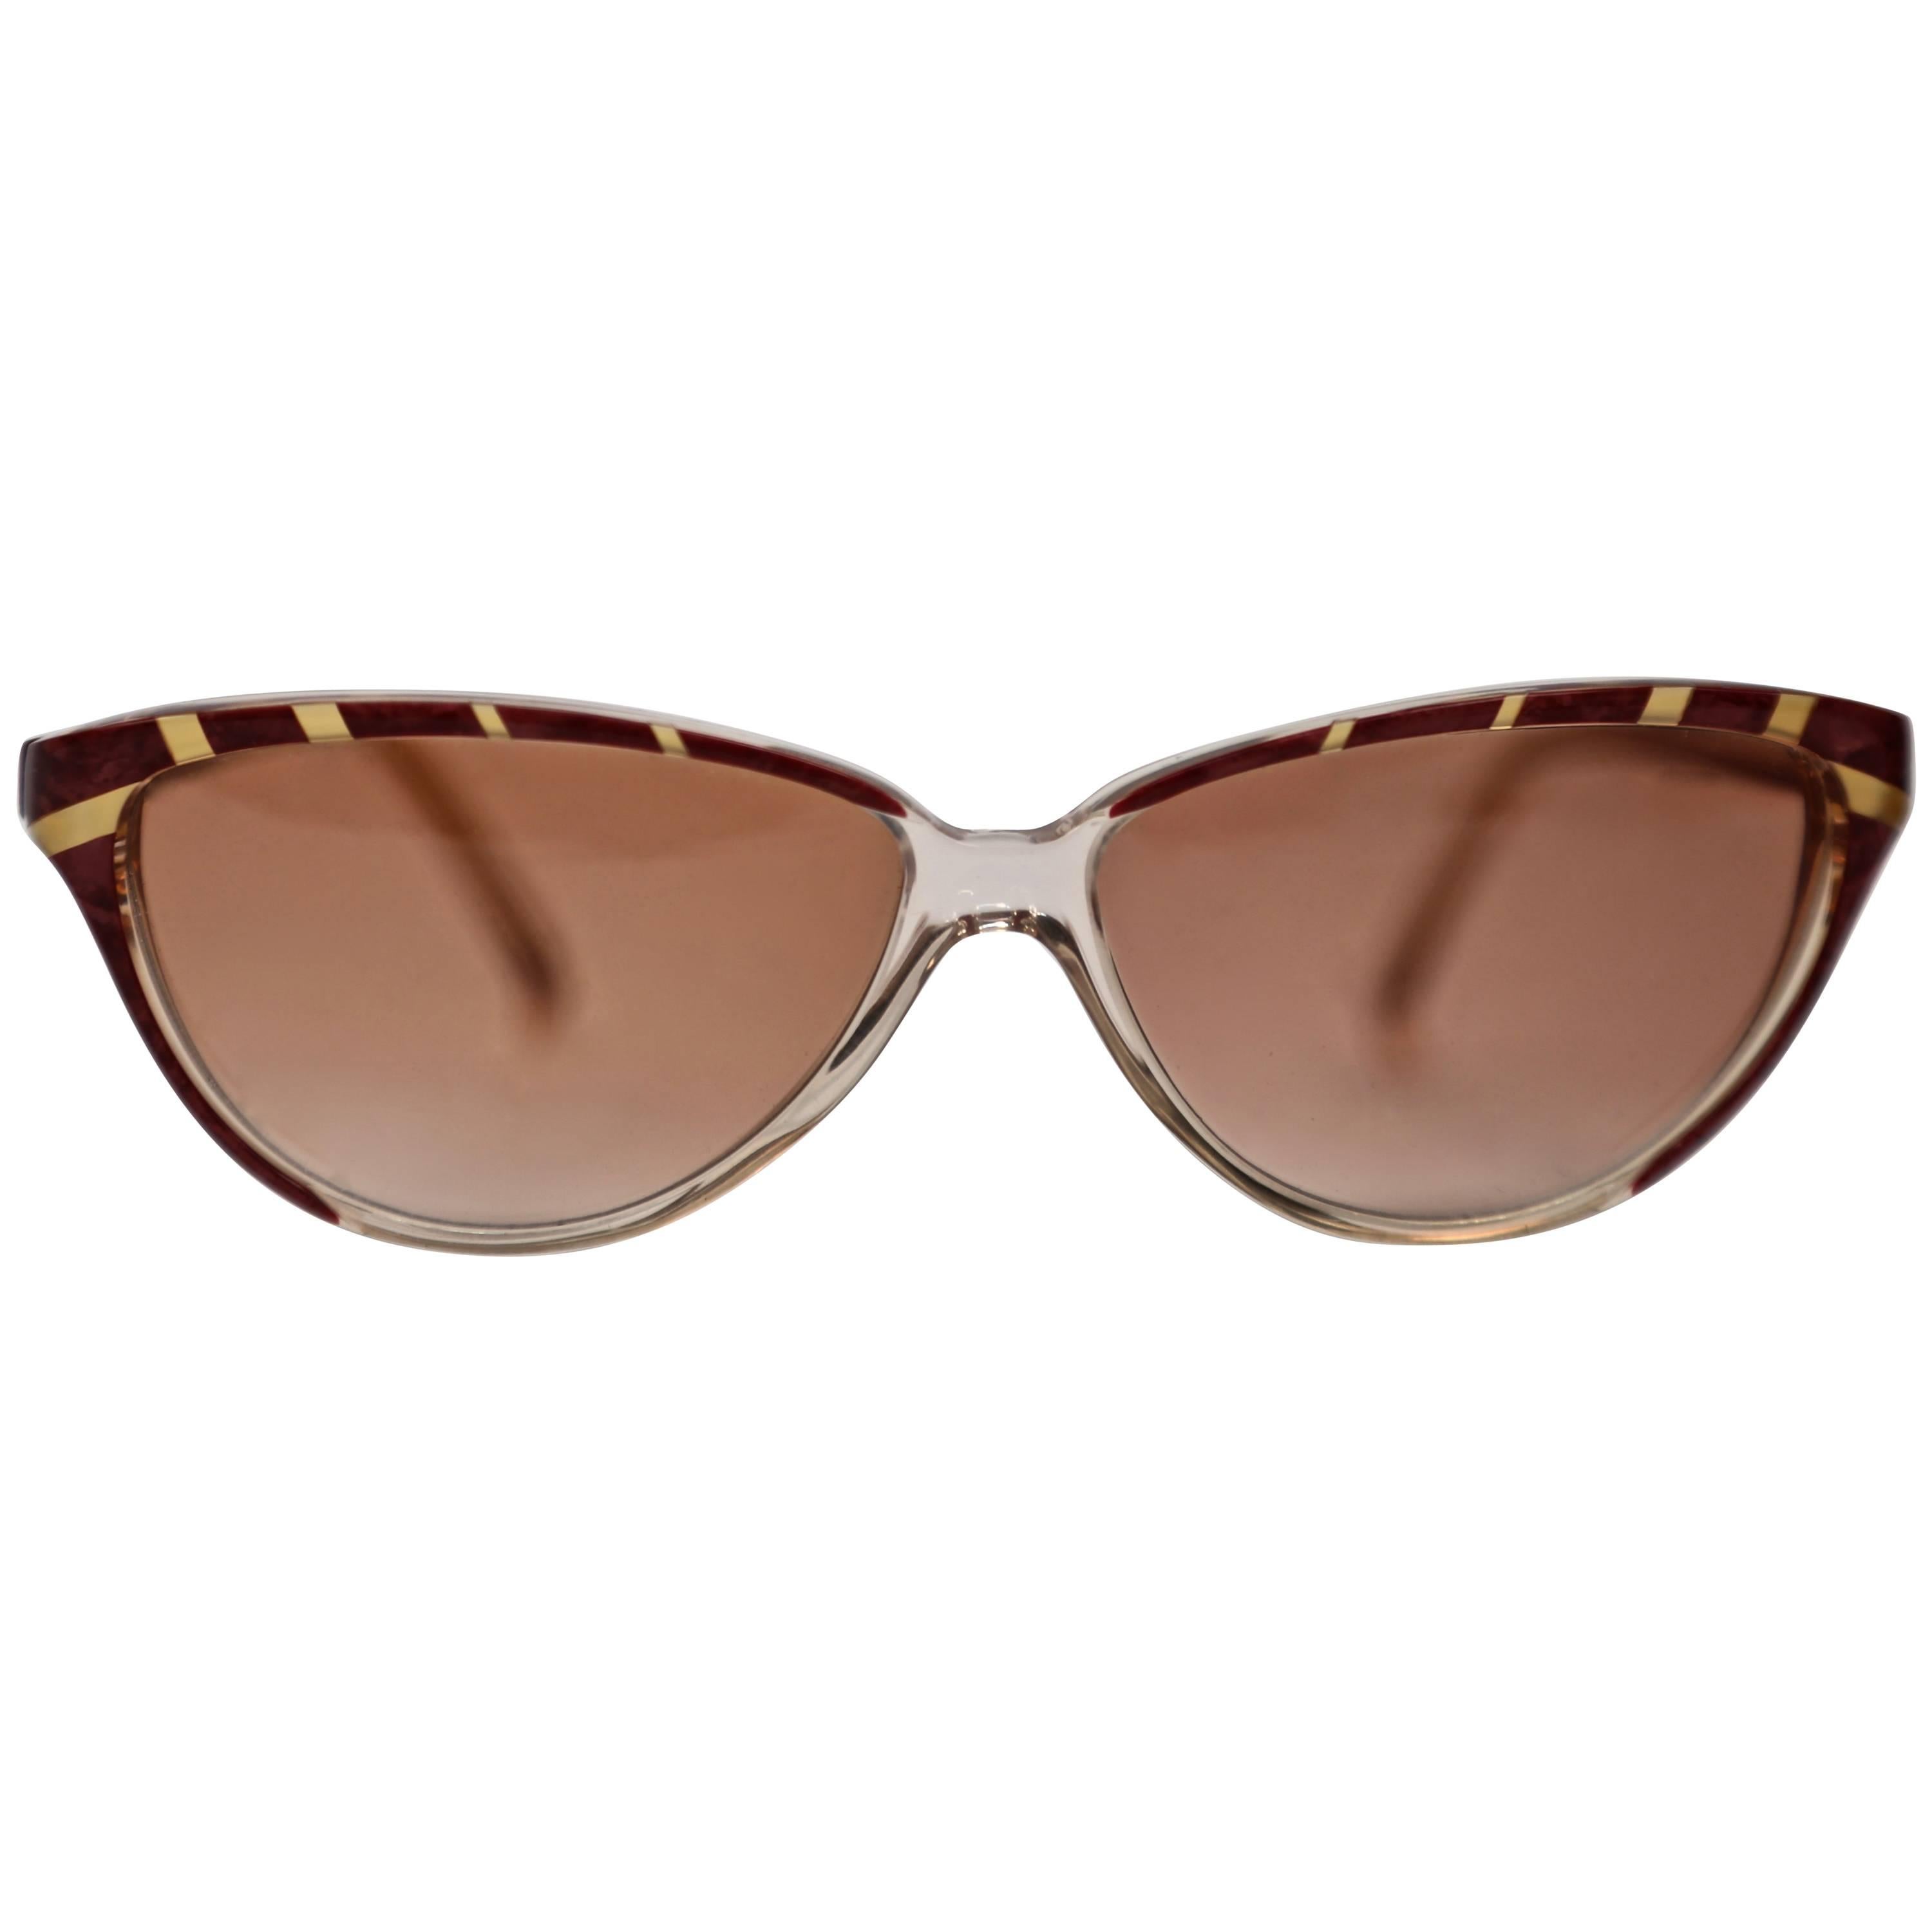 Nina Ricci rose cat-eye sunglasses with gold accents, 1980s